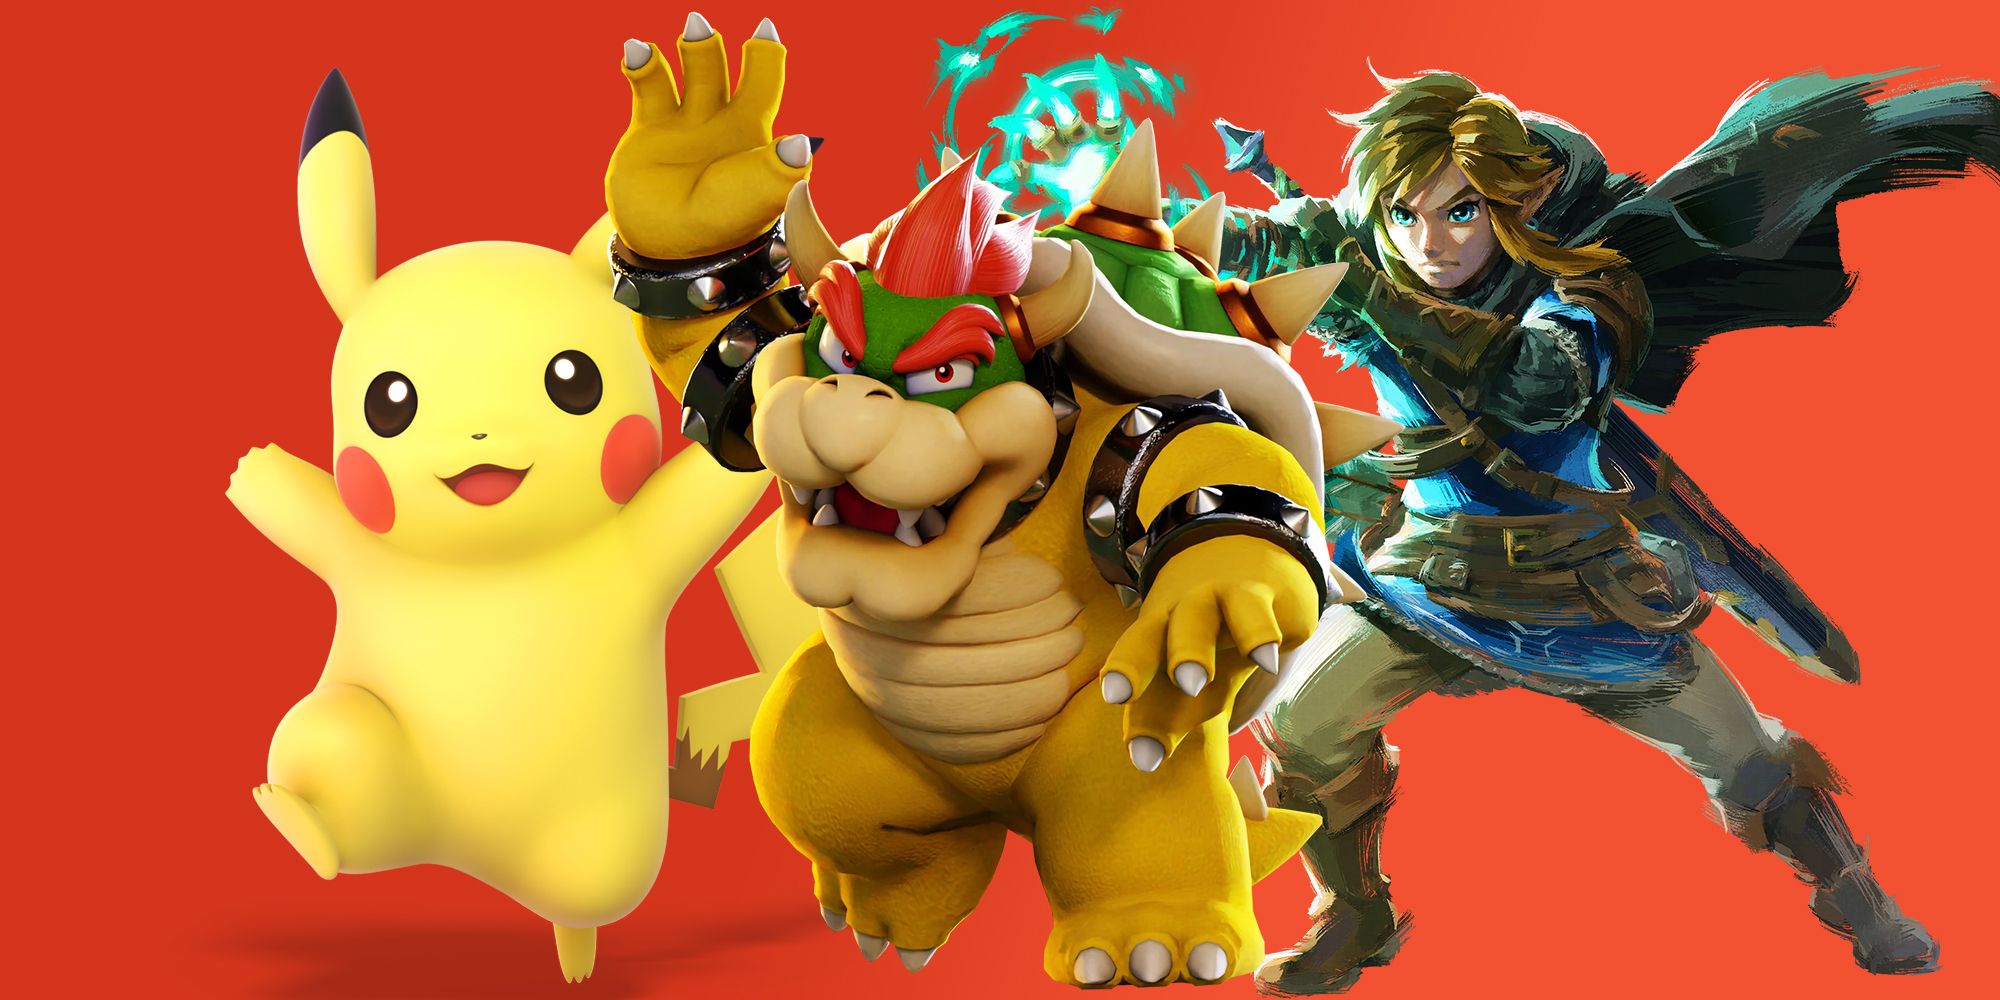 Pikachu, Bowser, and Link